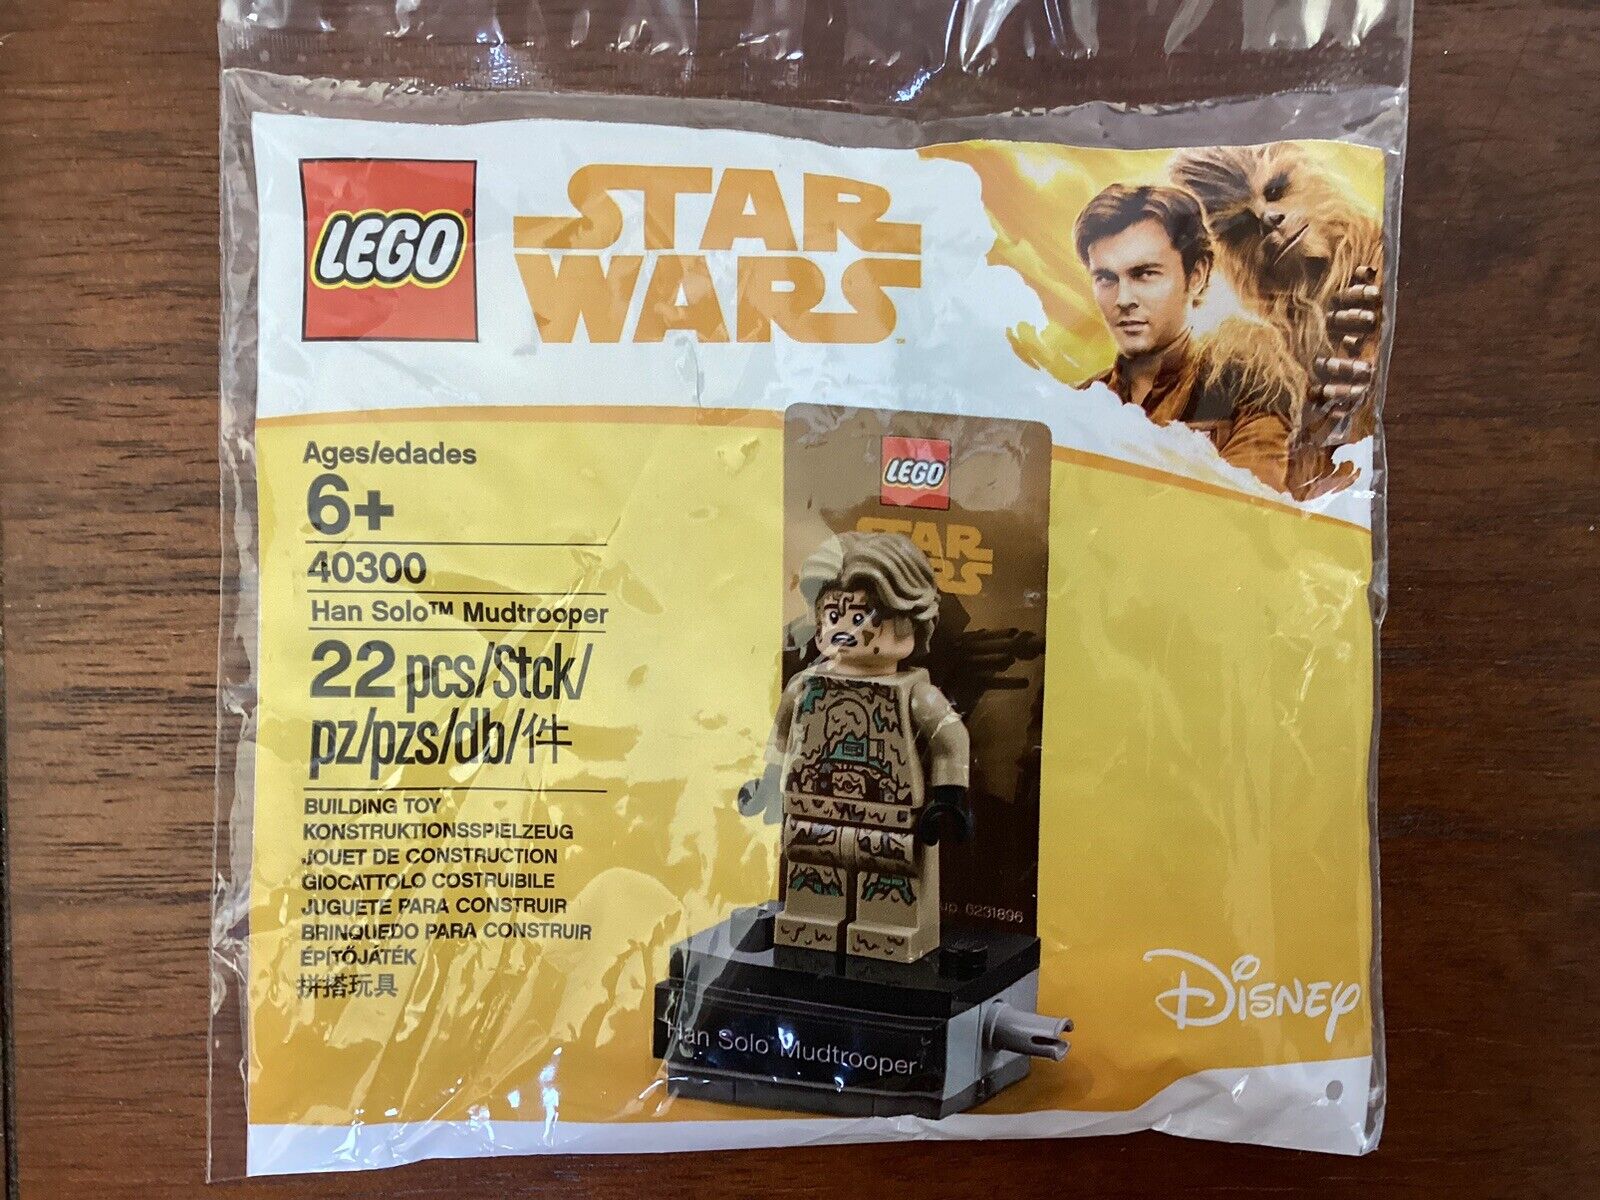 LEGO Star Wars - Rare Promo Exclusive - 40300 Han Solo Mudtrooper - New & Sealed